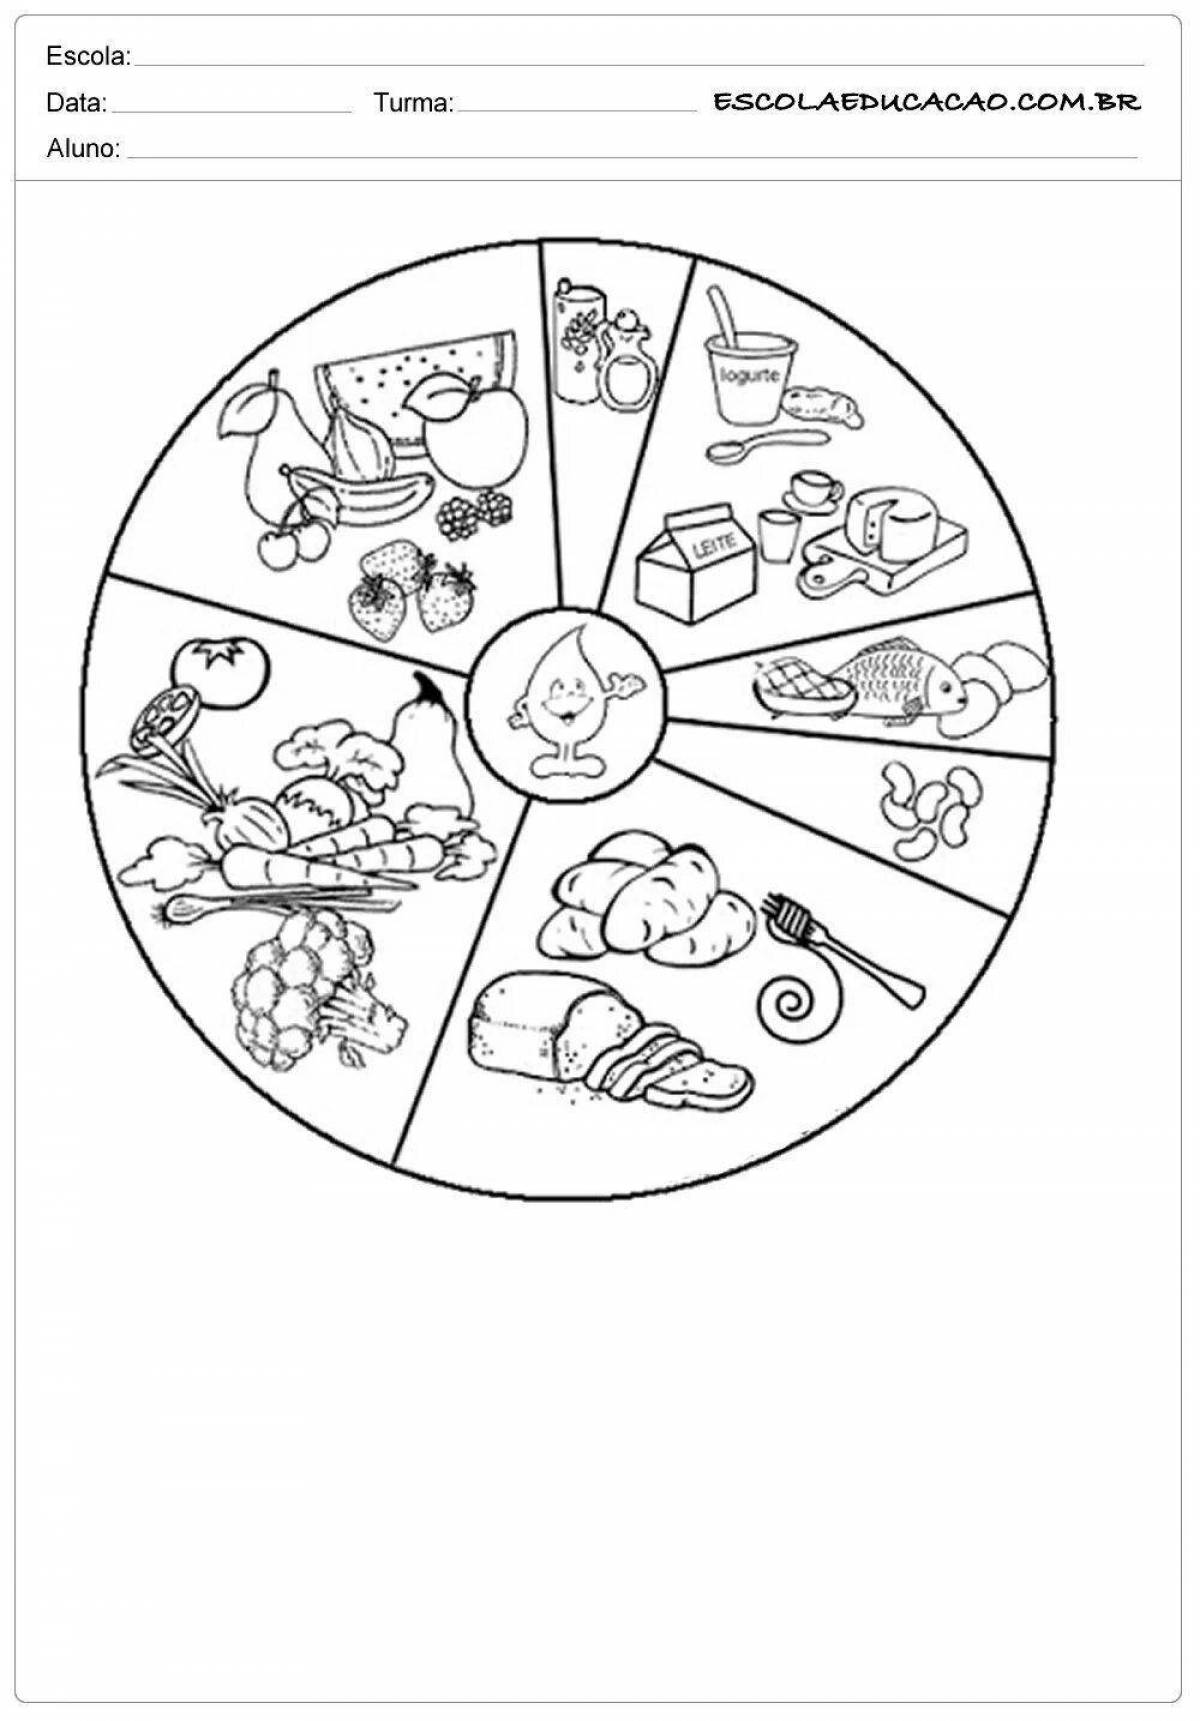 Coloring book encouraging a healthy lifestyle